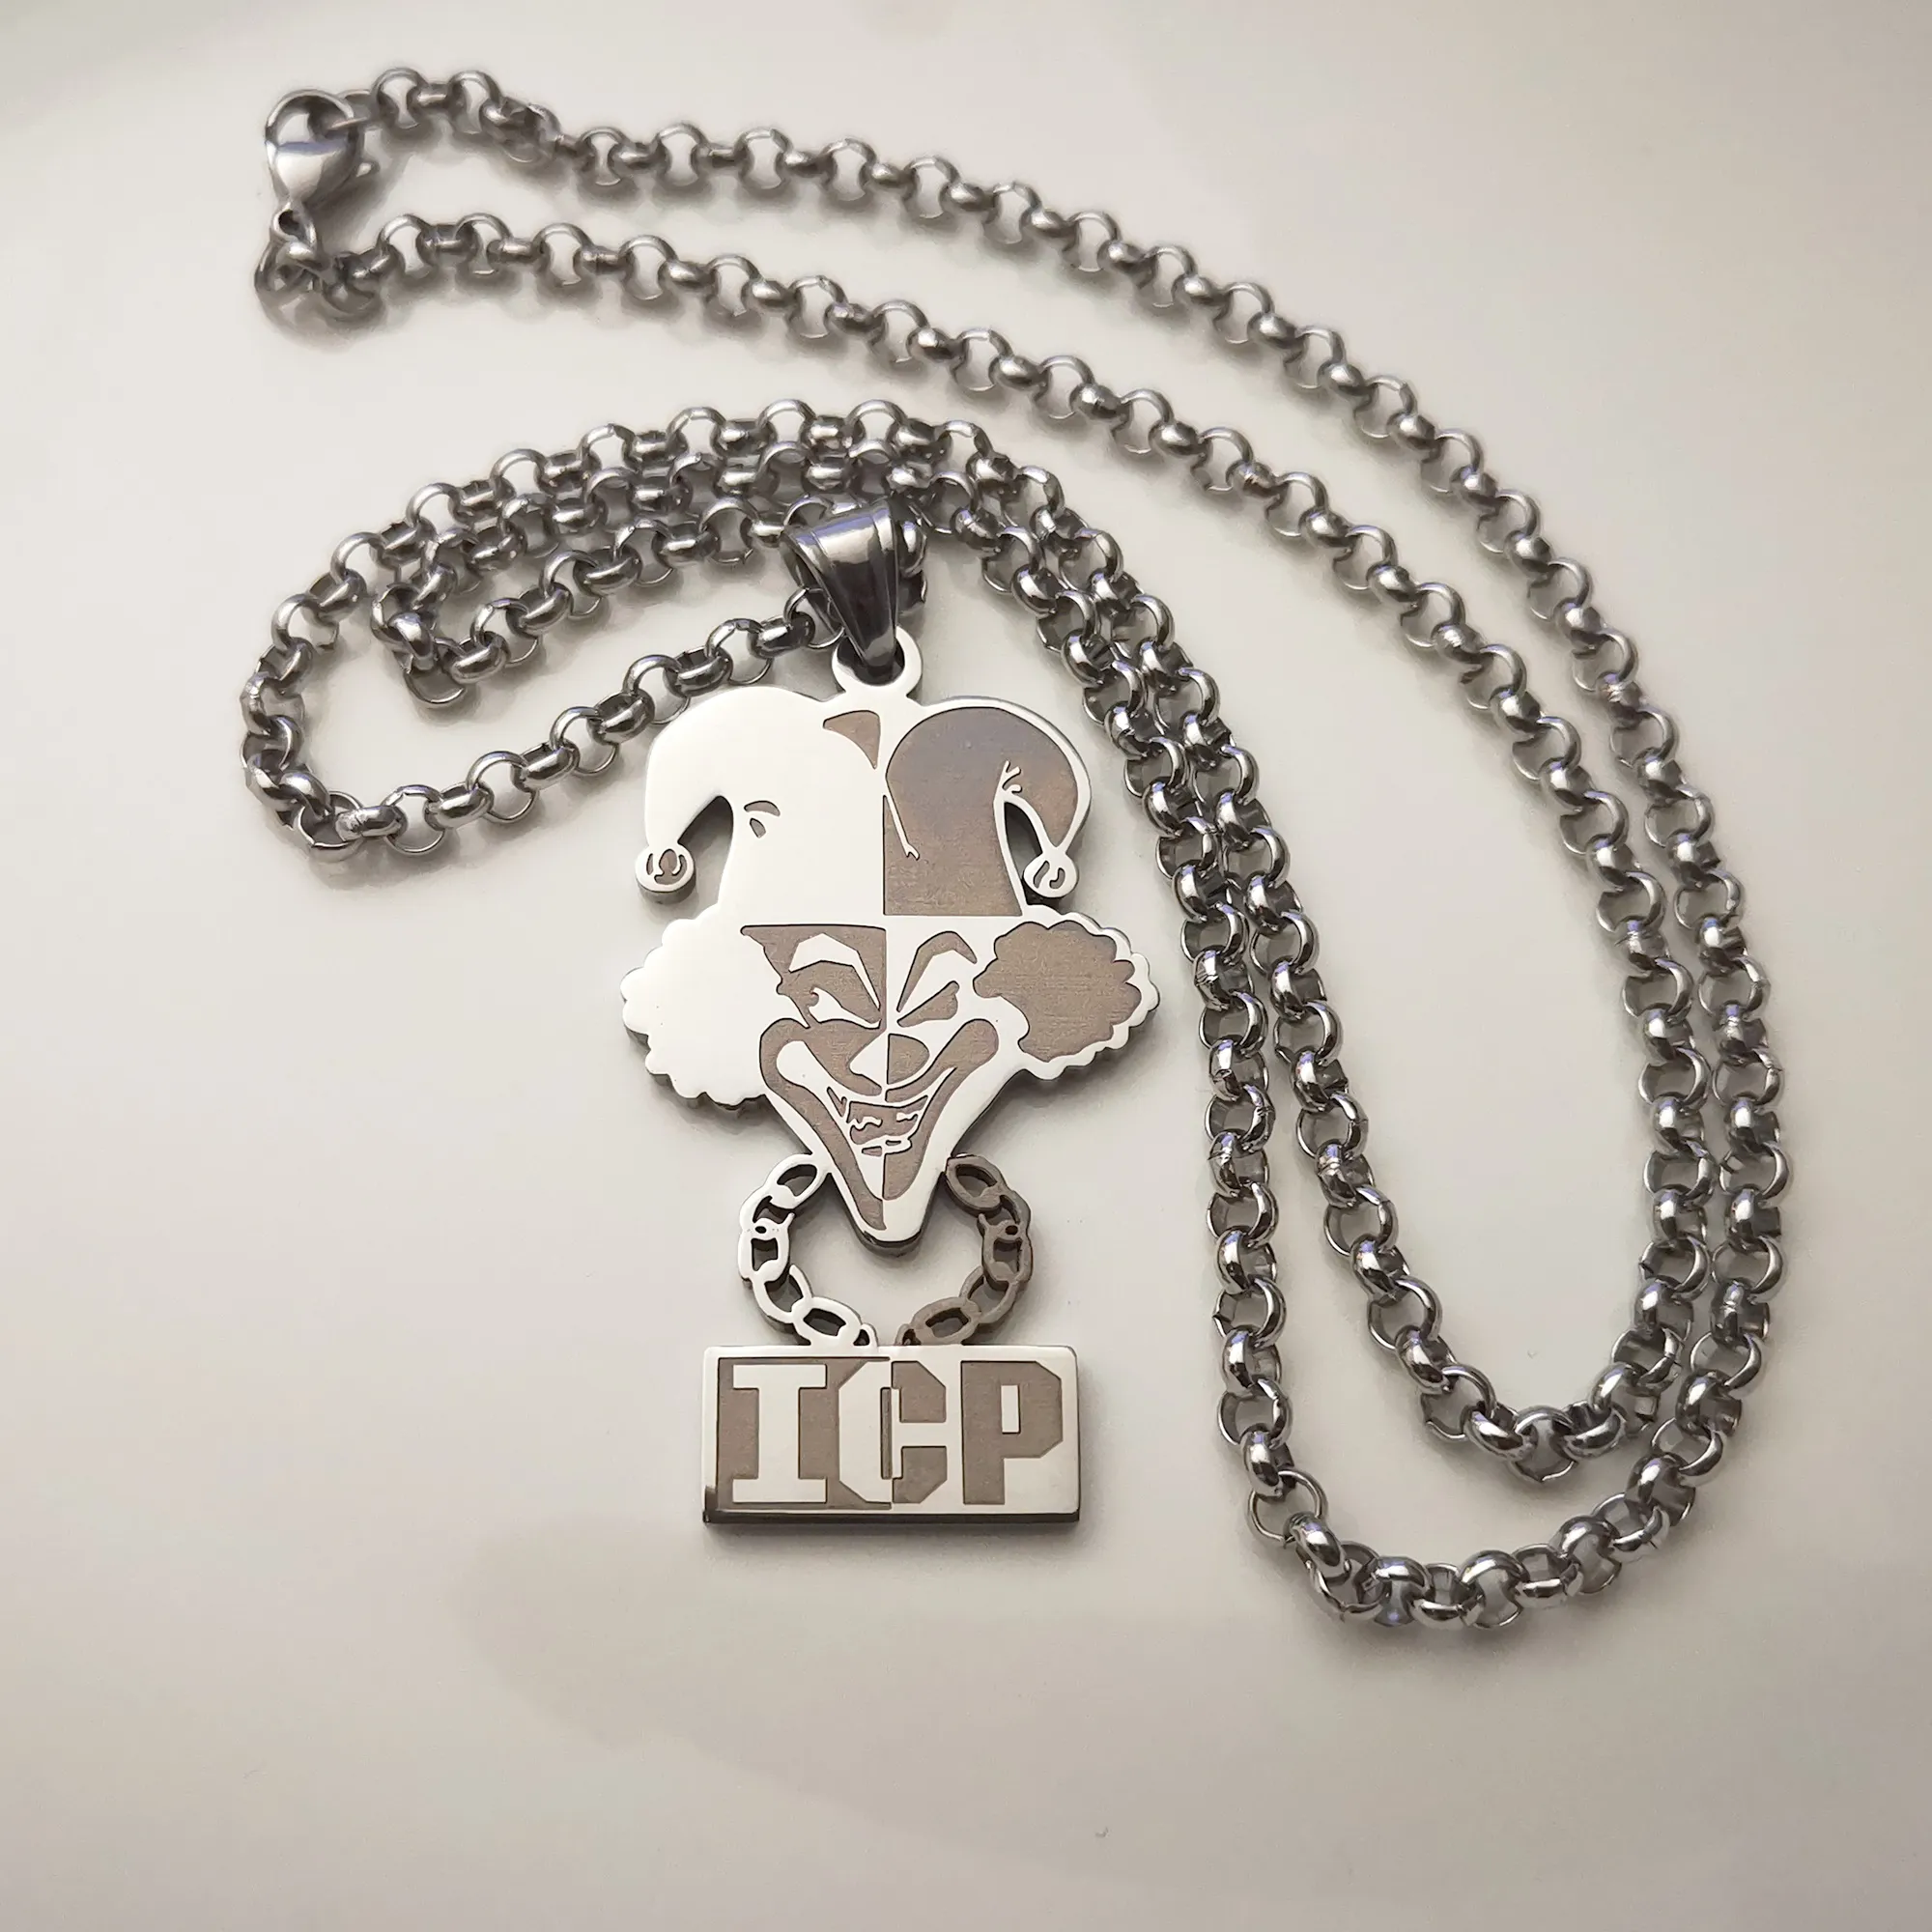 High Polished Silver Stainless Steel ICP CLOWN TWIZTID PENDANT CHARM NECKLACE 4mm 24INCH Rolo CHAIN Jugallo for Mens268k